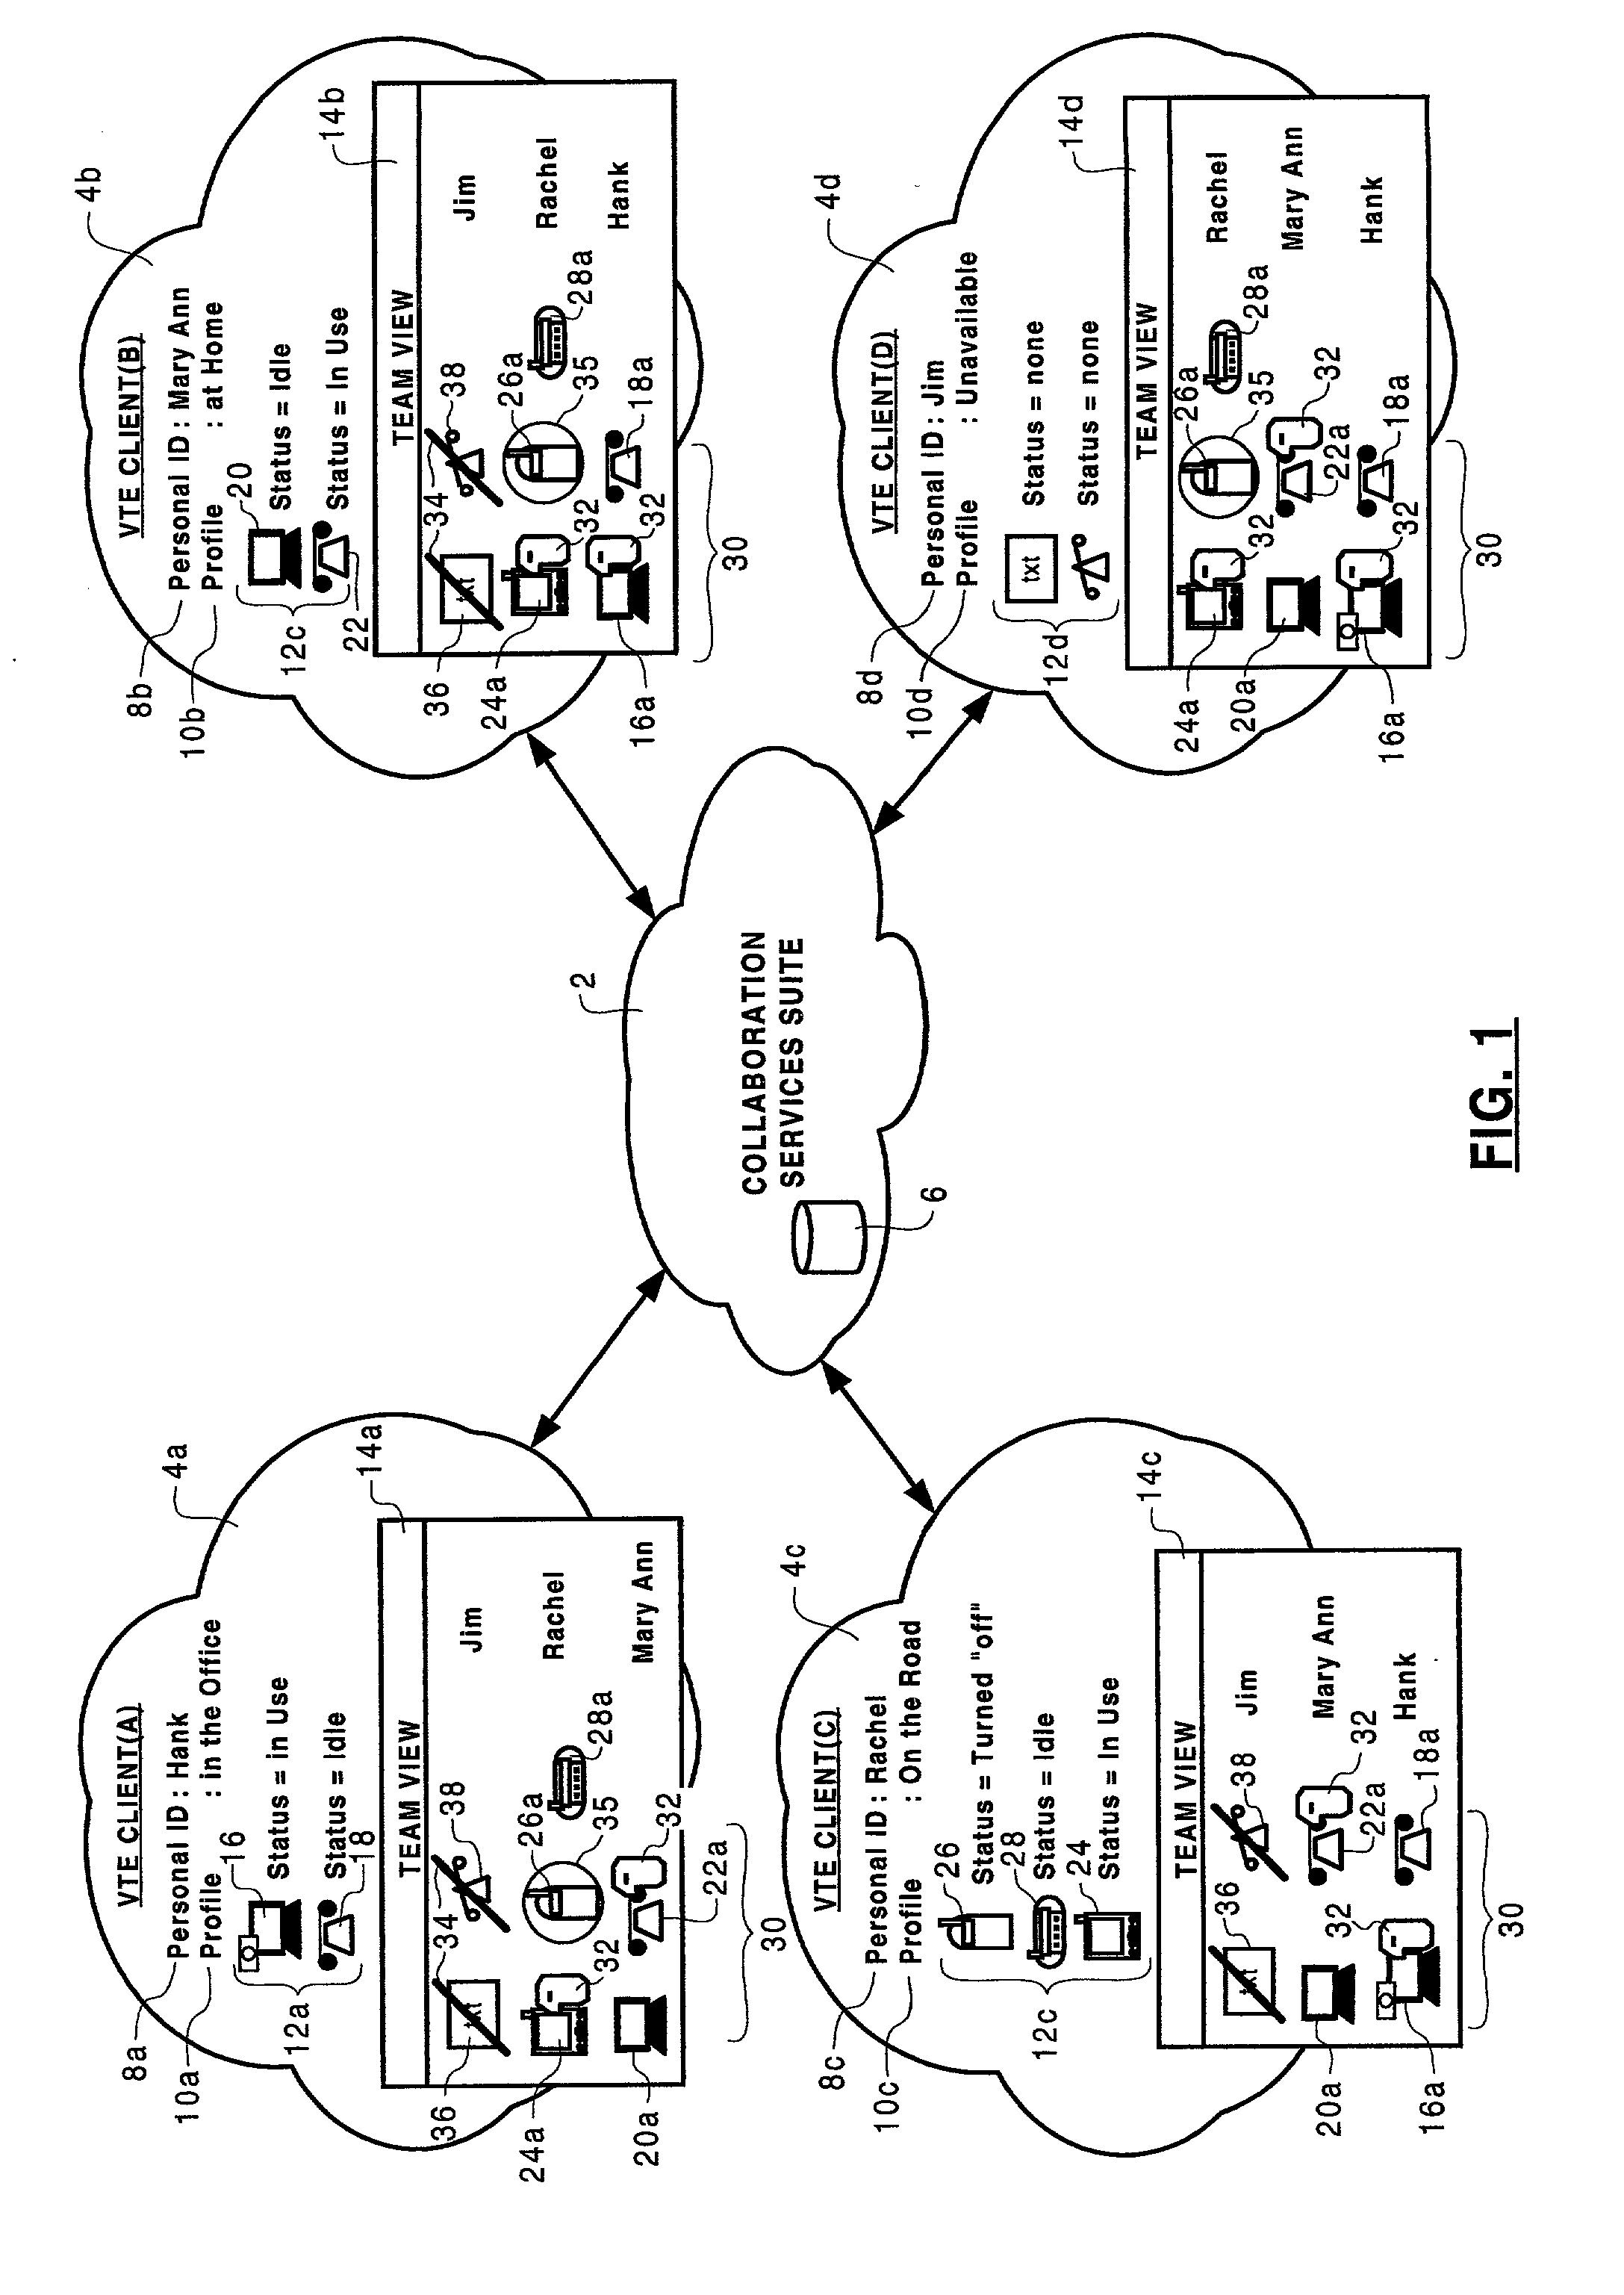 Method of team member profile selection within a virtual team environment